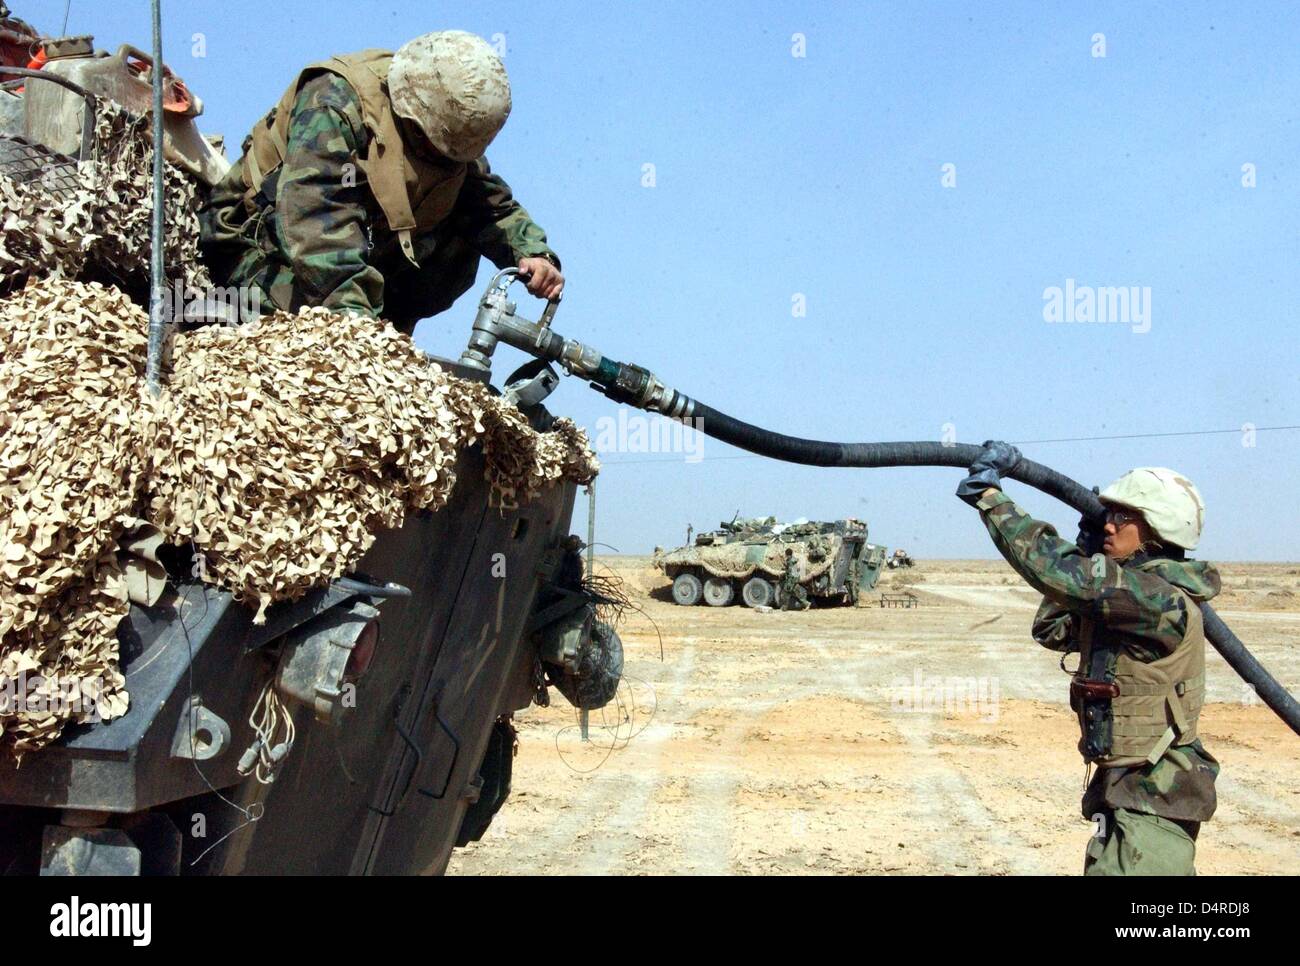 Two US soldiers of the 3rd Light Armored Reconnaissance Batallion of the US Marine infantry refuel a light reconnaissance vehicle on freeway 1, 90 km south of Baghdad, on 1 April 2003. Stock Photo